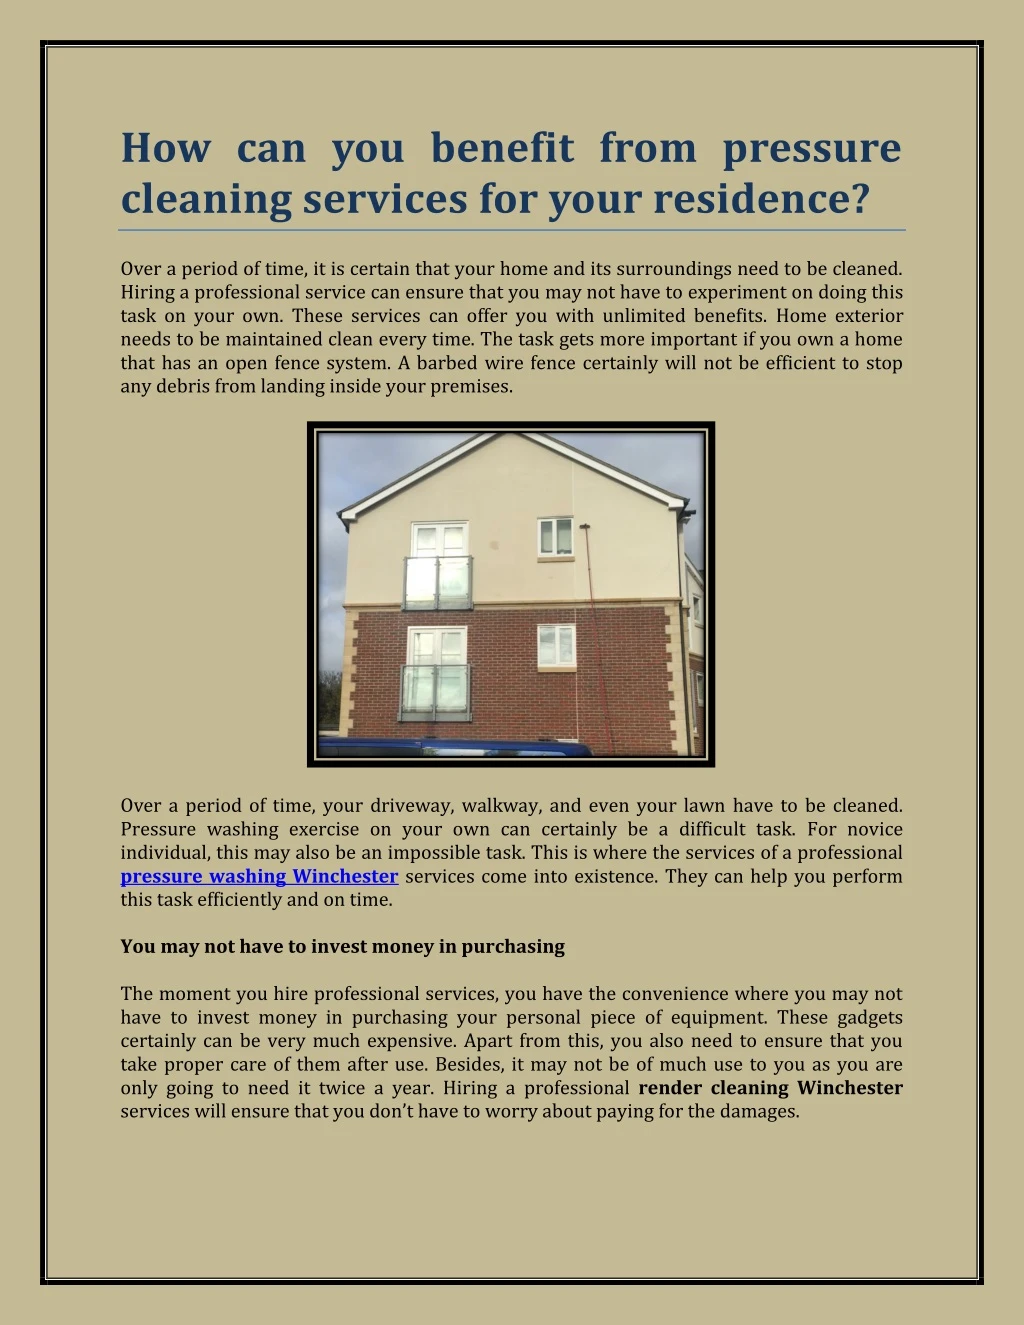 how can you benefit from pressure cleaning